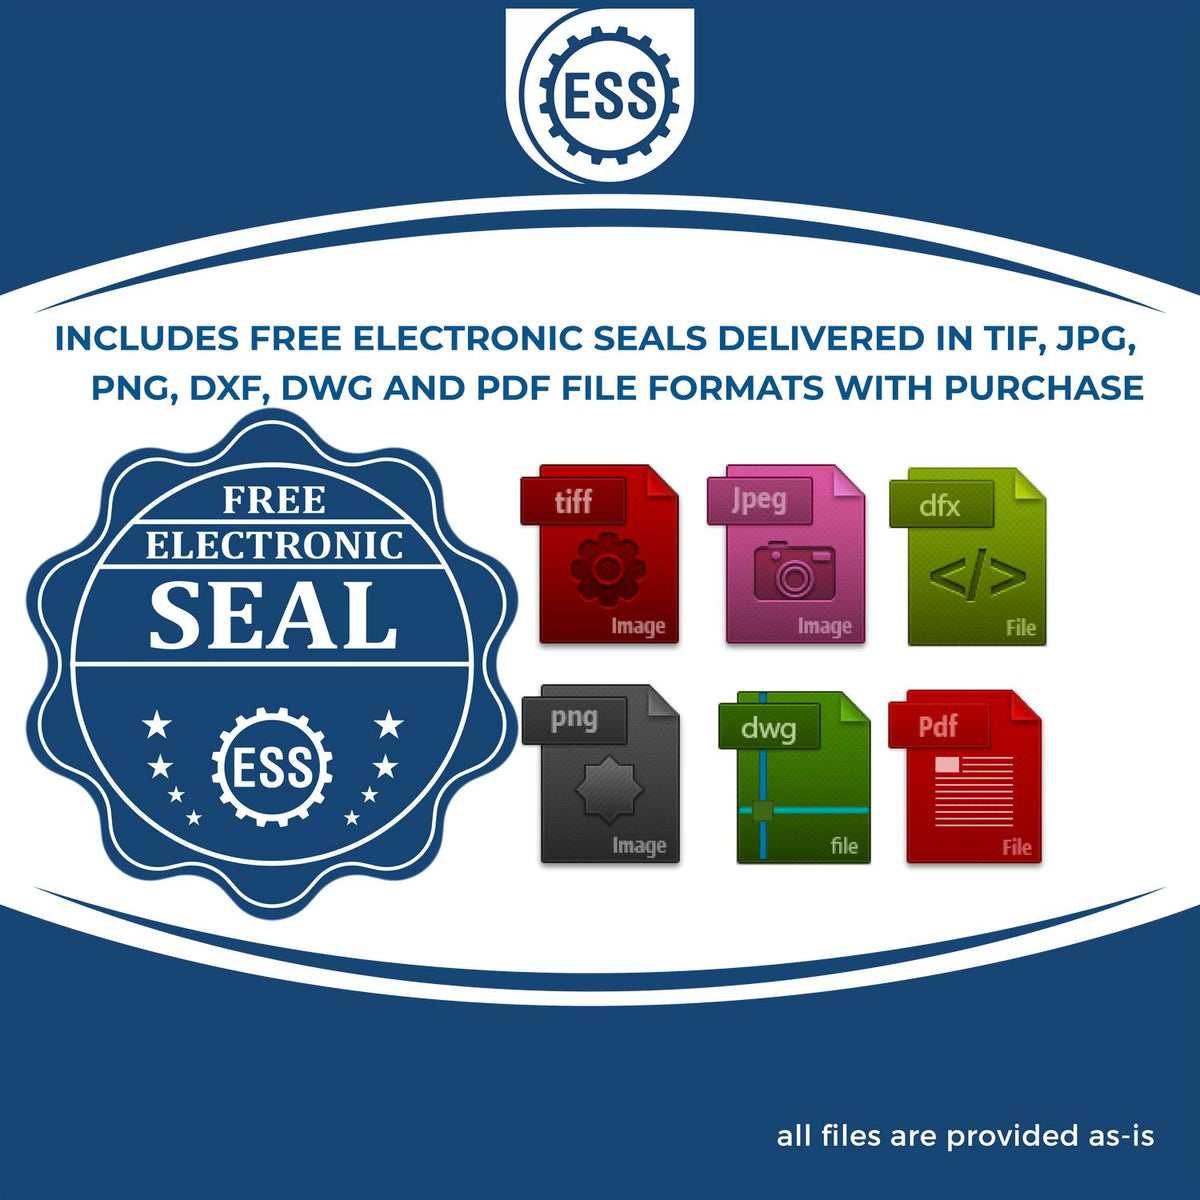 An infographic for the free electronic seal for the Slim Pre-Inked New Hampshire Professional Geologist Seal Stamp illustrating the different file type icons such as DXF, DWG, TIF, JPG and PNG.